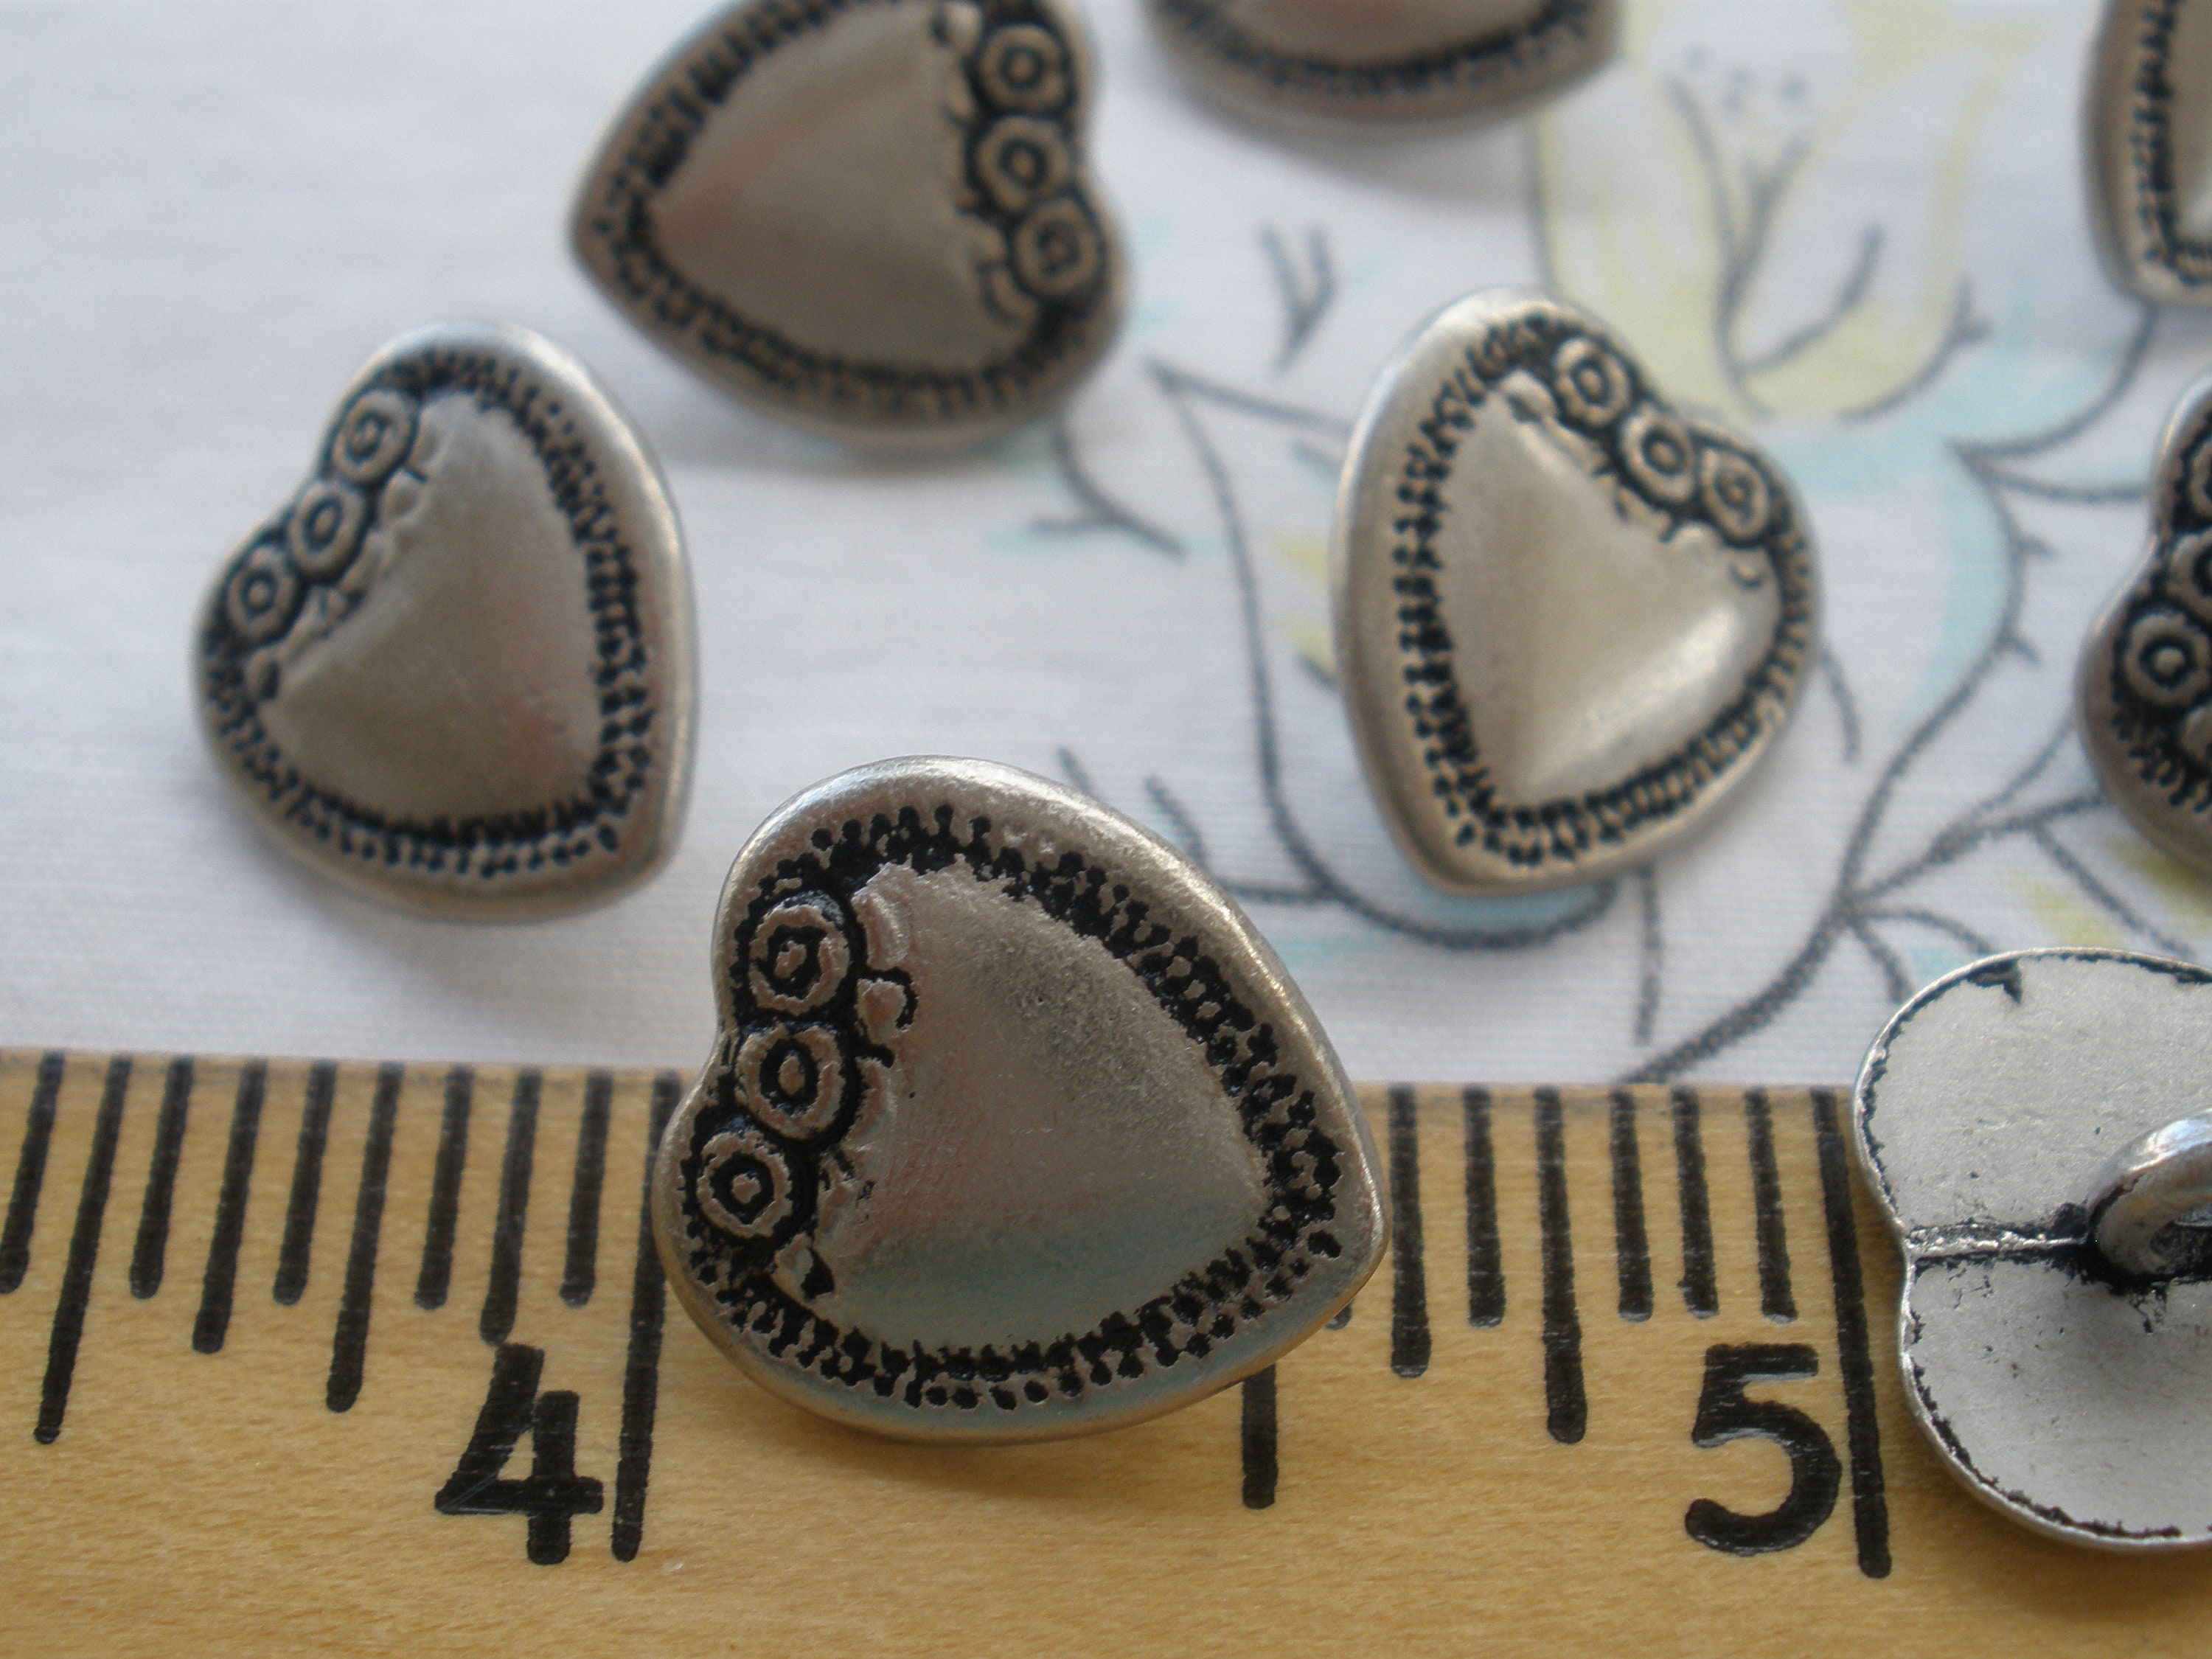 Hot Metal Heart Buttons For Crafts Supplies Woman Clothes Diy Embellishment  Replace Items Coats Suit Sewing Accessories 6pcs/lot